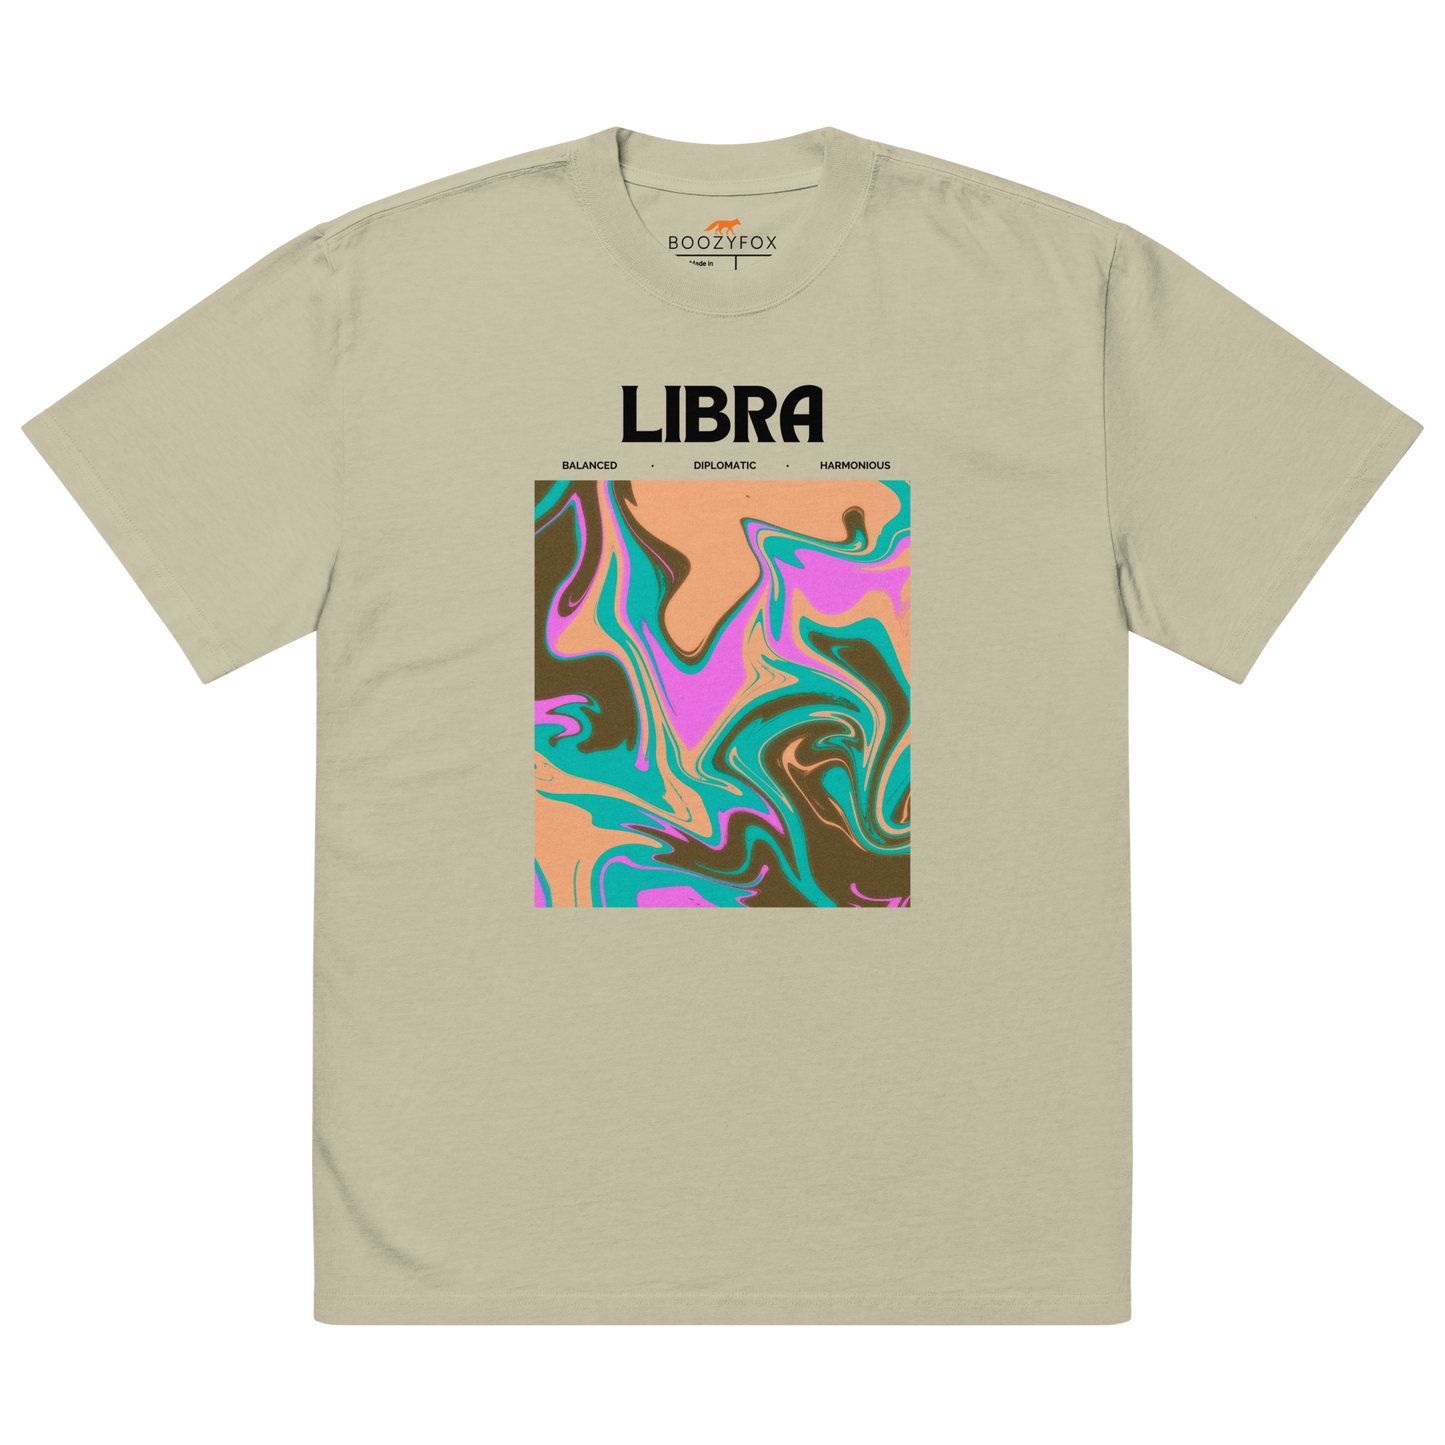 Faded Eucalyptus Libra Oversized T-Shirt featuring an Abstract Libra Star Sign graphic on the chest - Cool Graphic Zodiac Oversized Tees - Boozy Fox